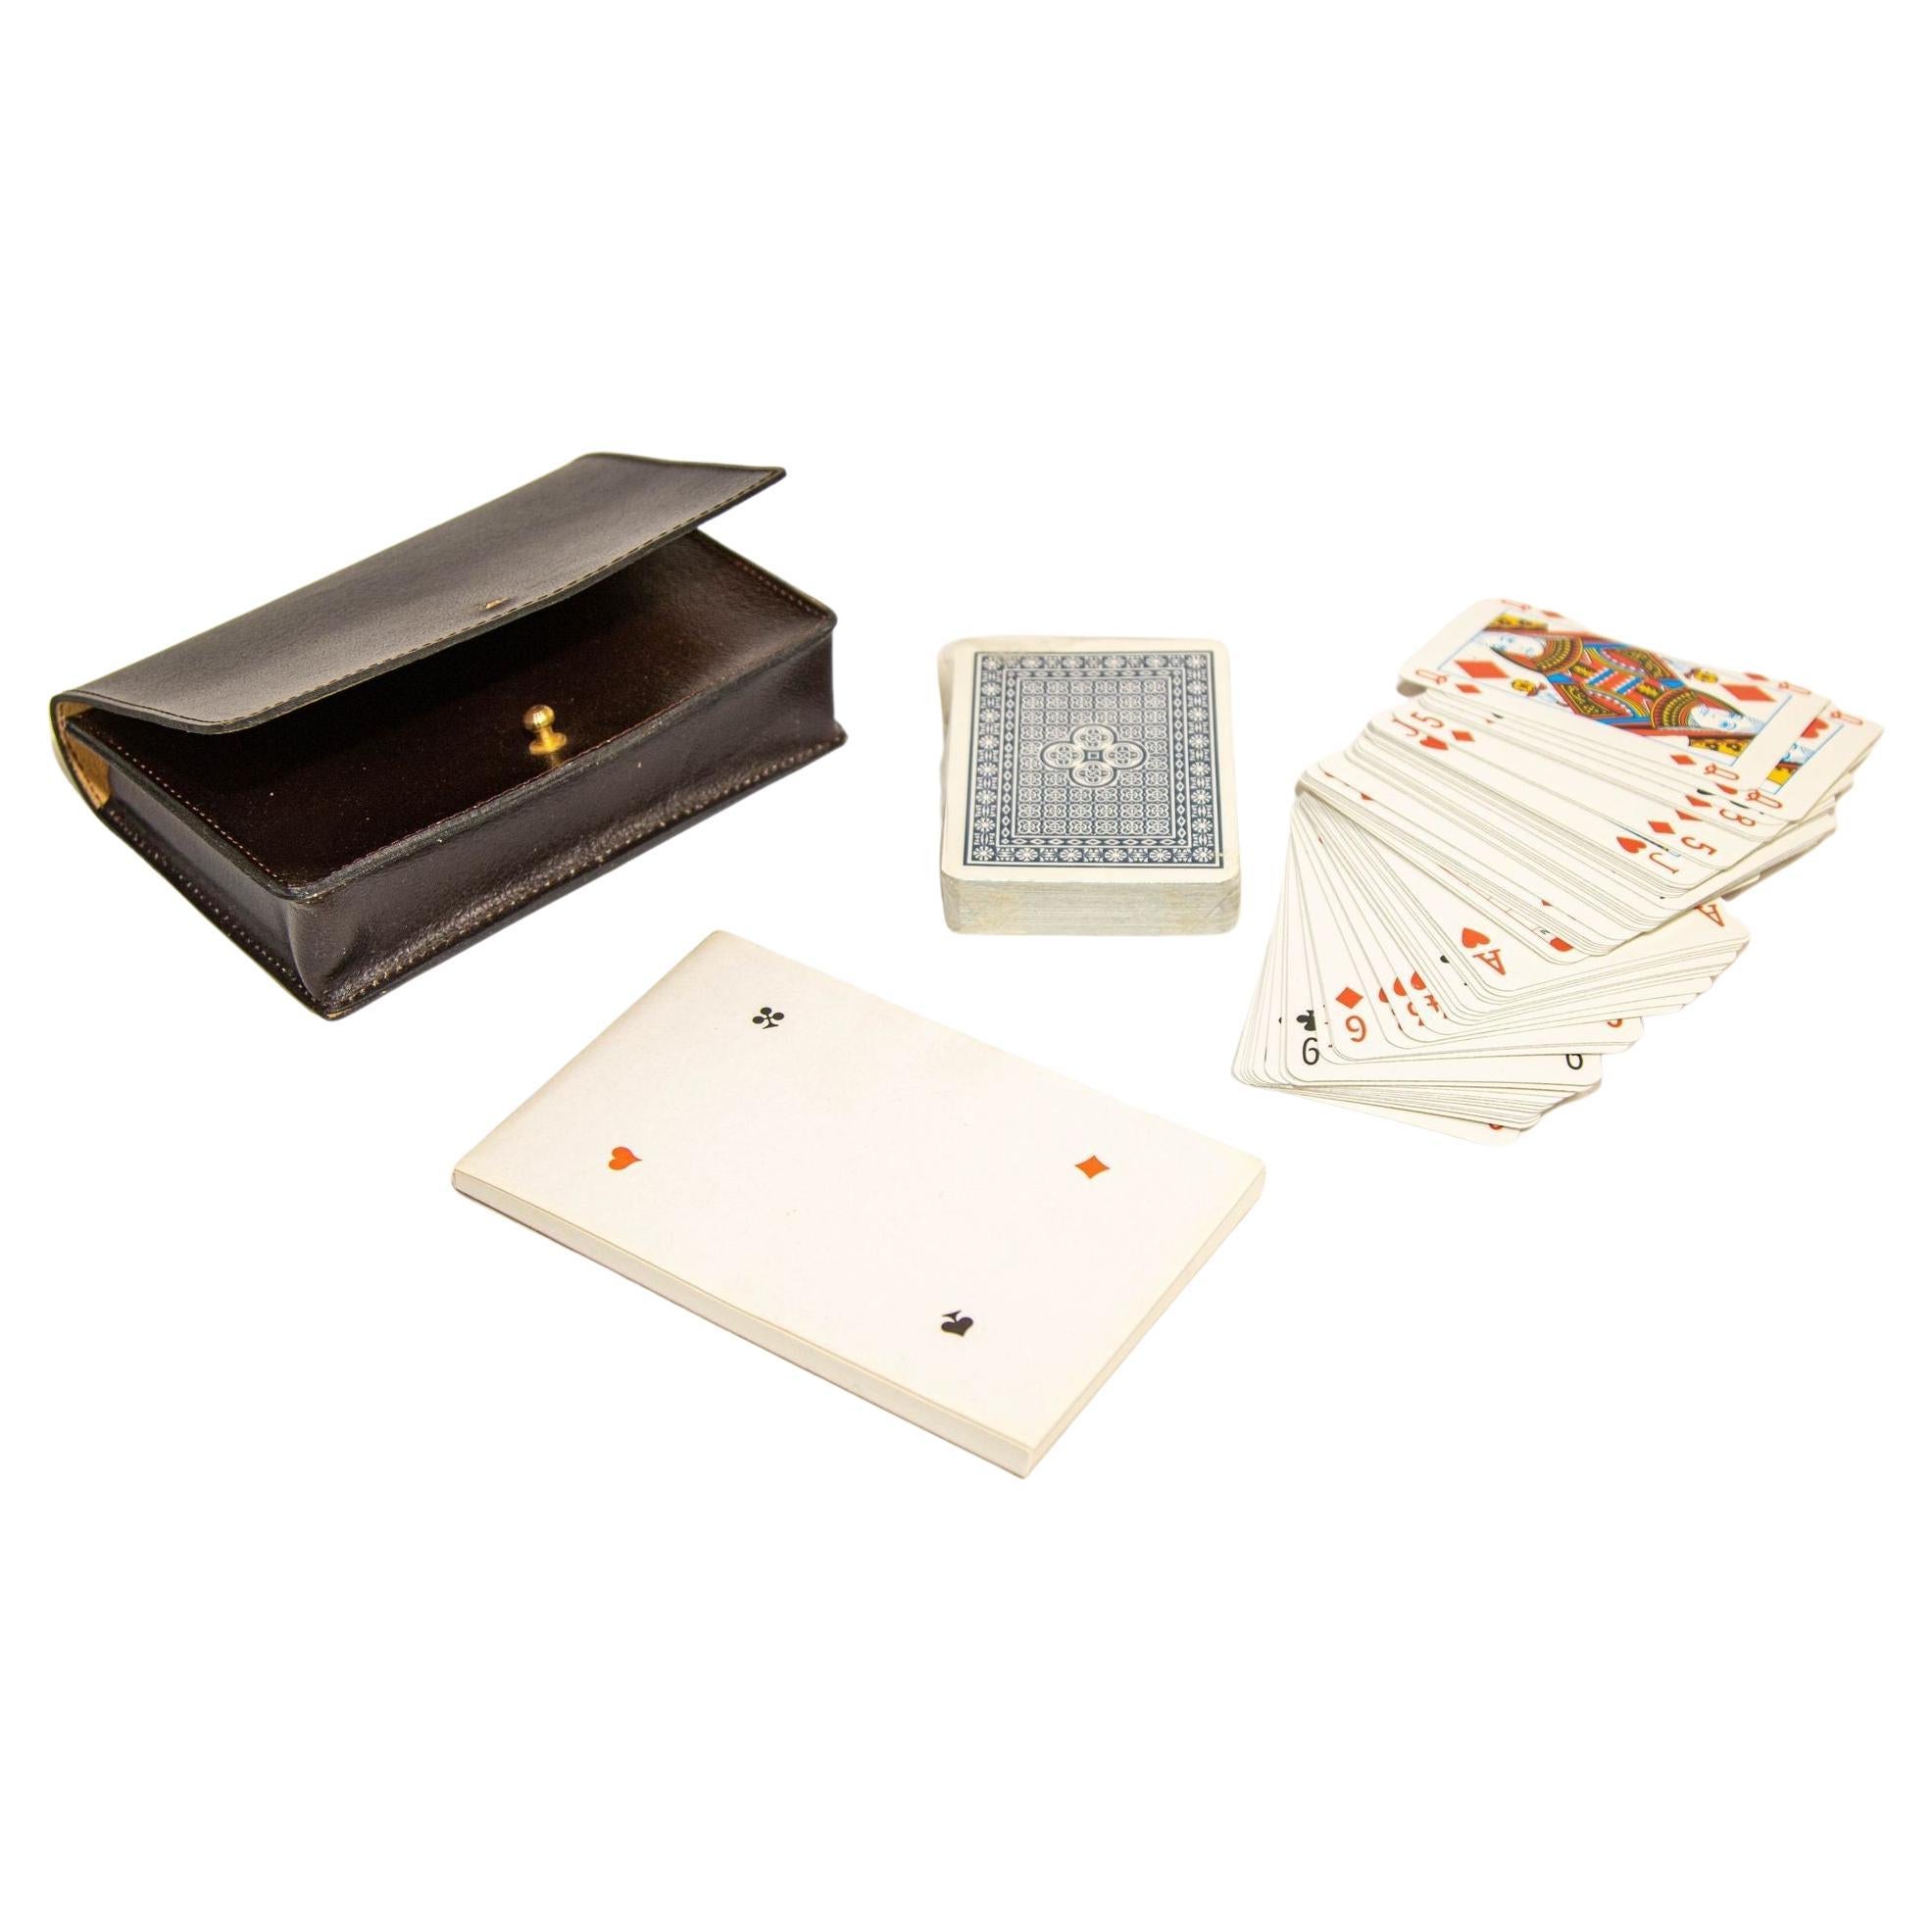 Vintage Leather Bridge, Poker Playing Card Game Case with 2 Card Decks